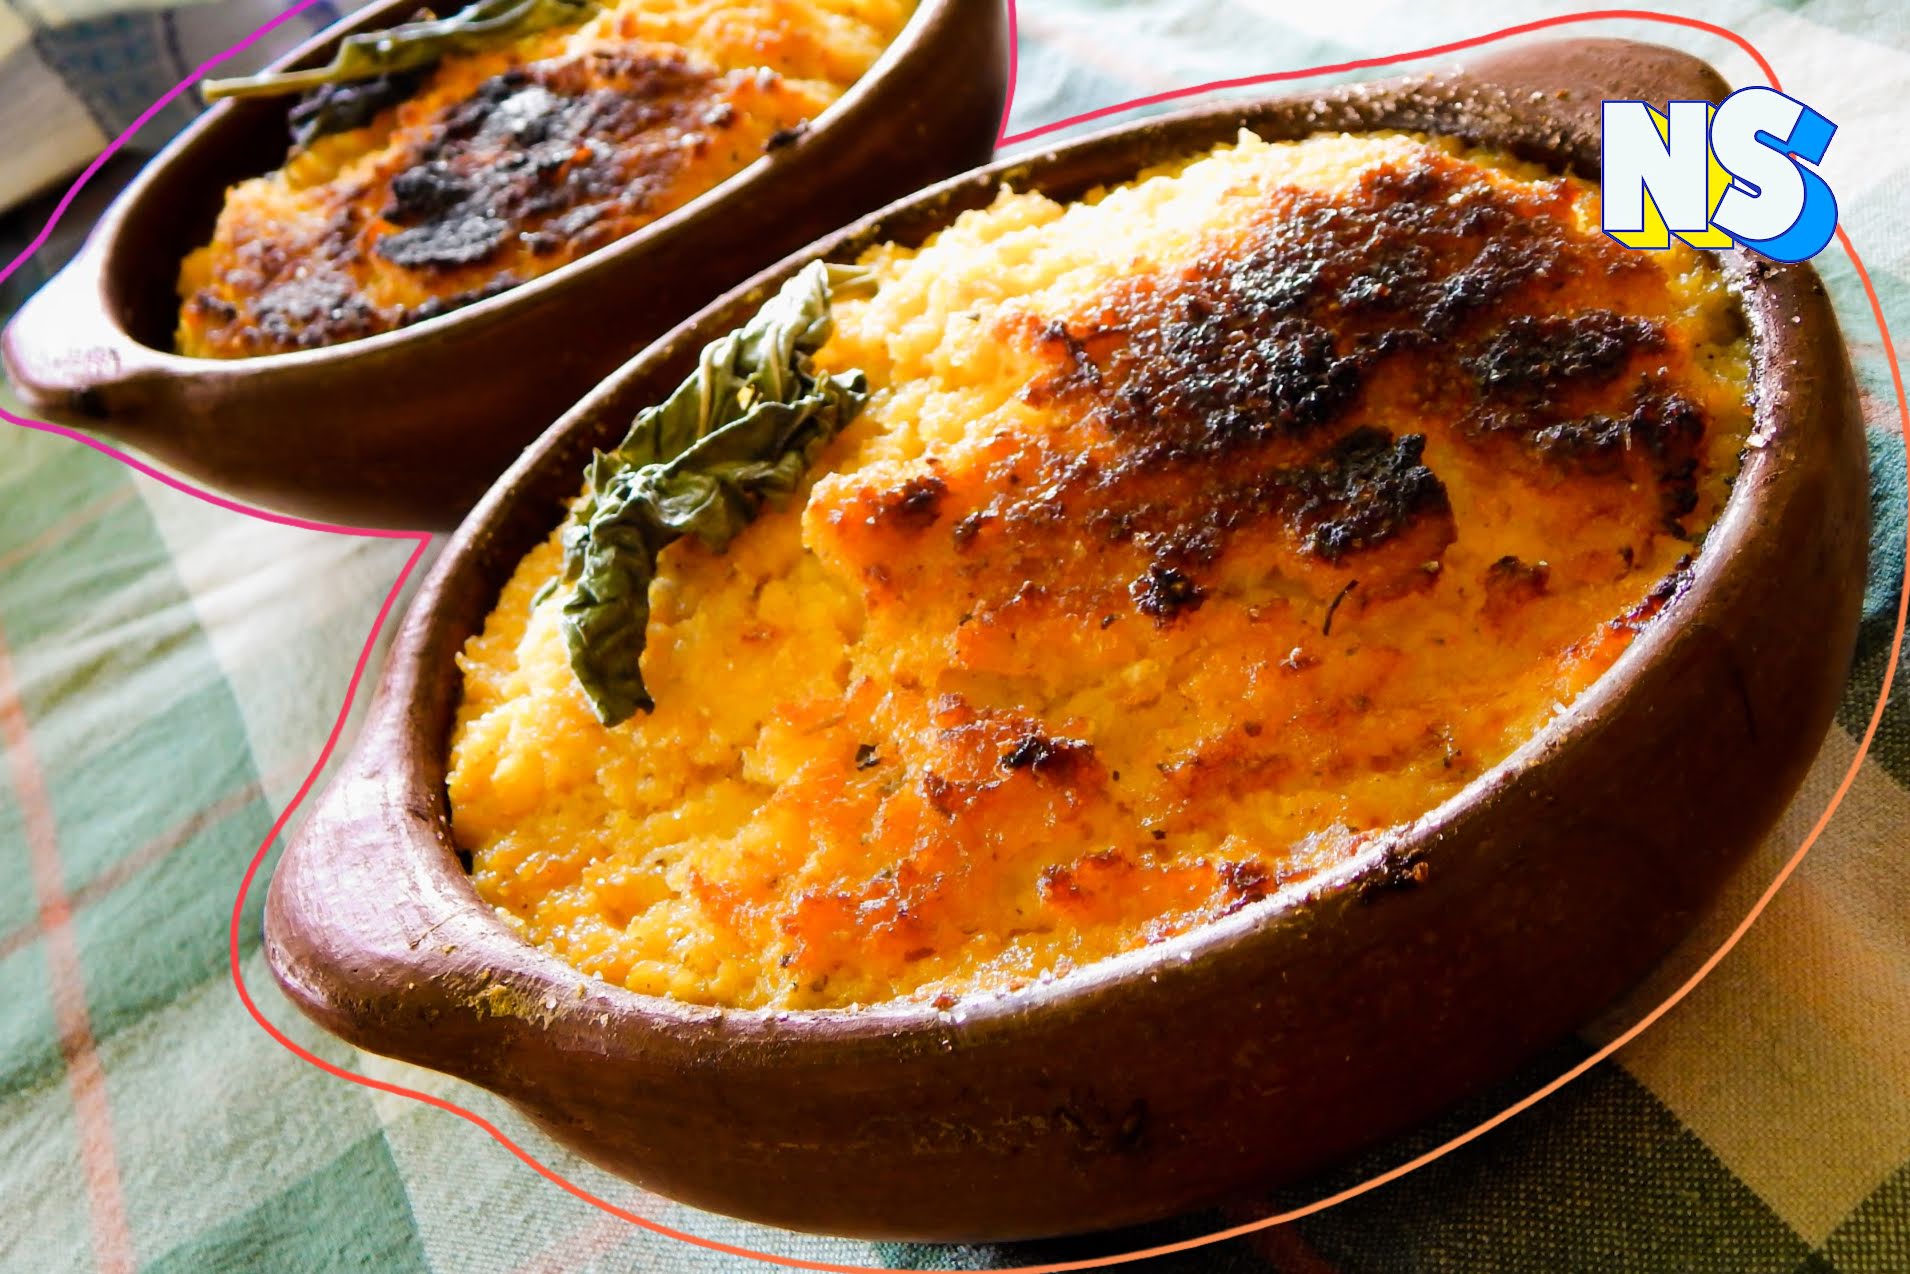 Pastel de Choclo: The Ancestral Chilean Dish That Makes an Entire Country Beam with Pride